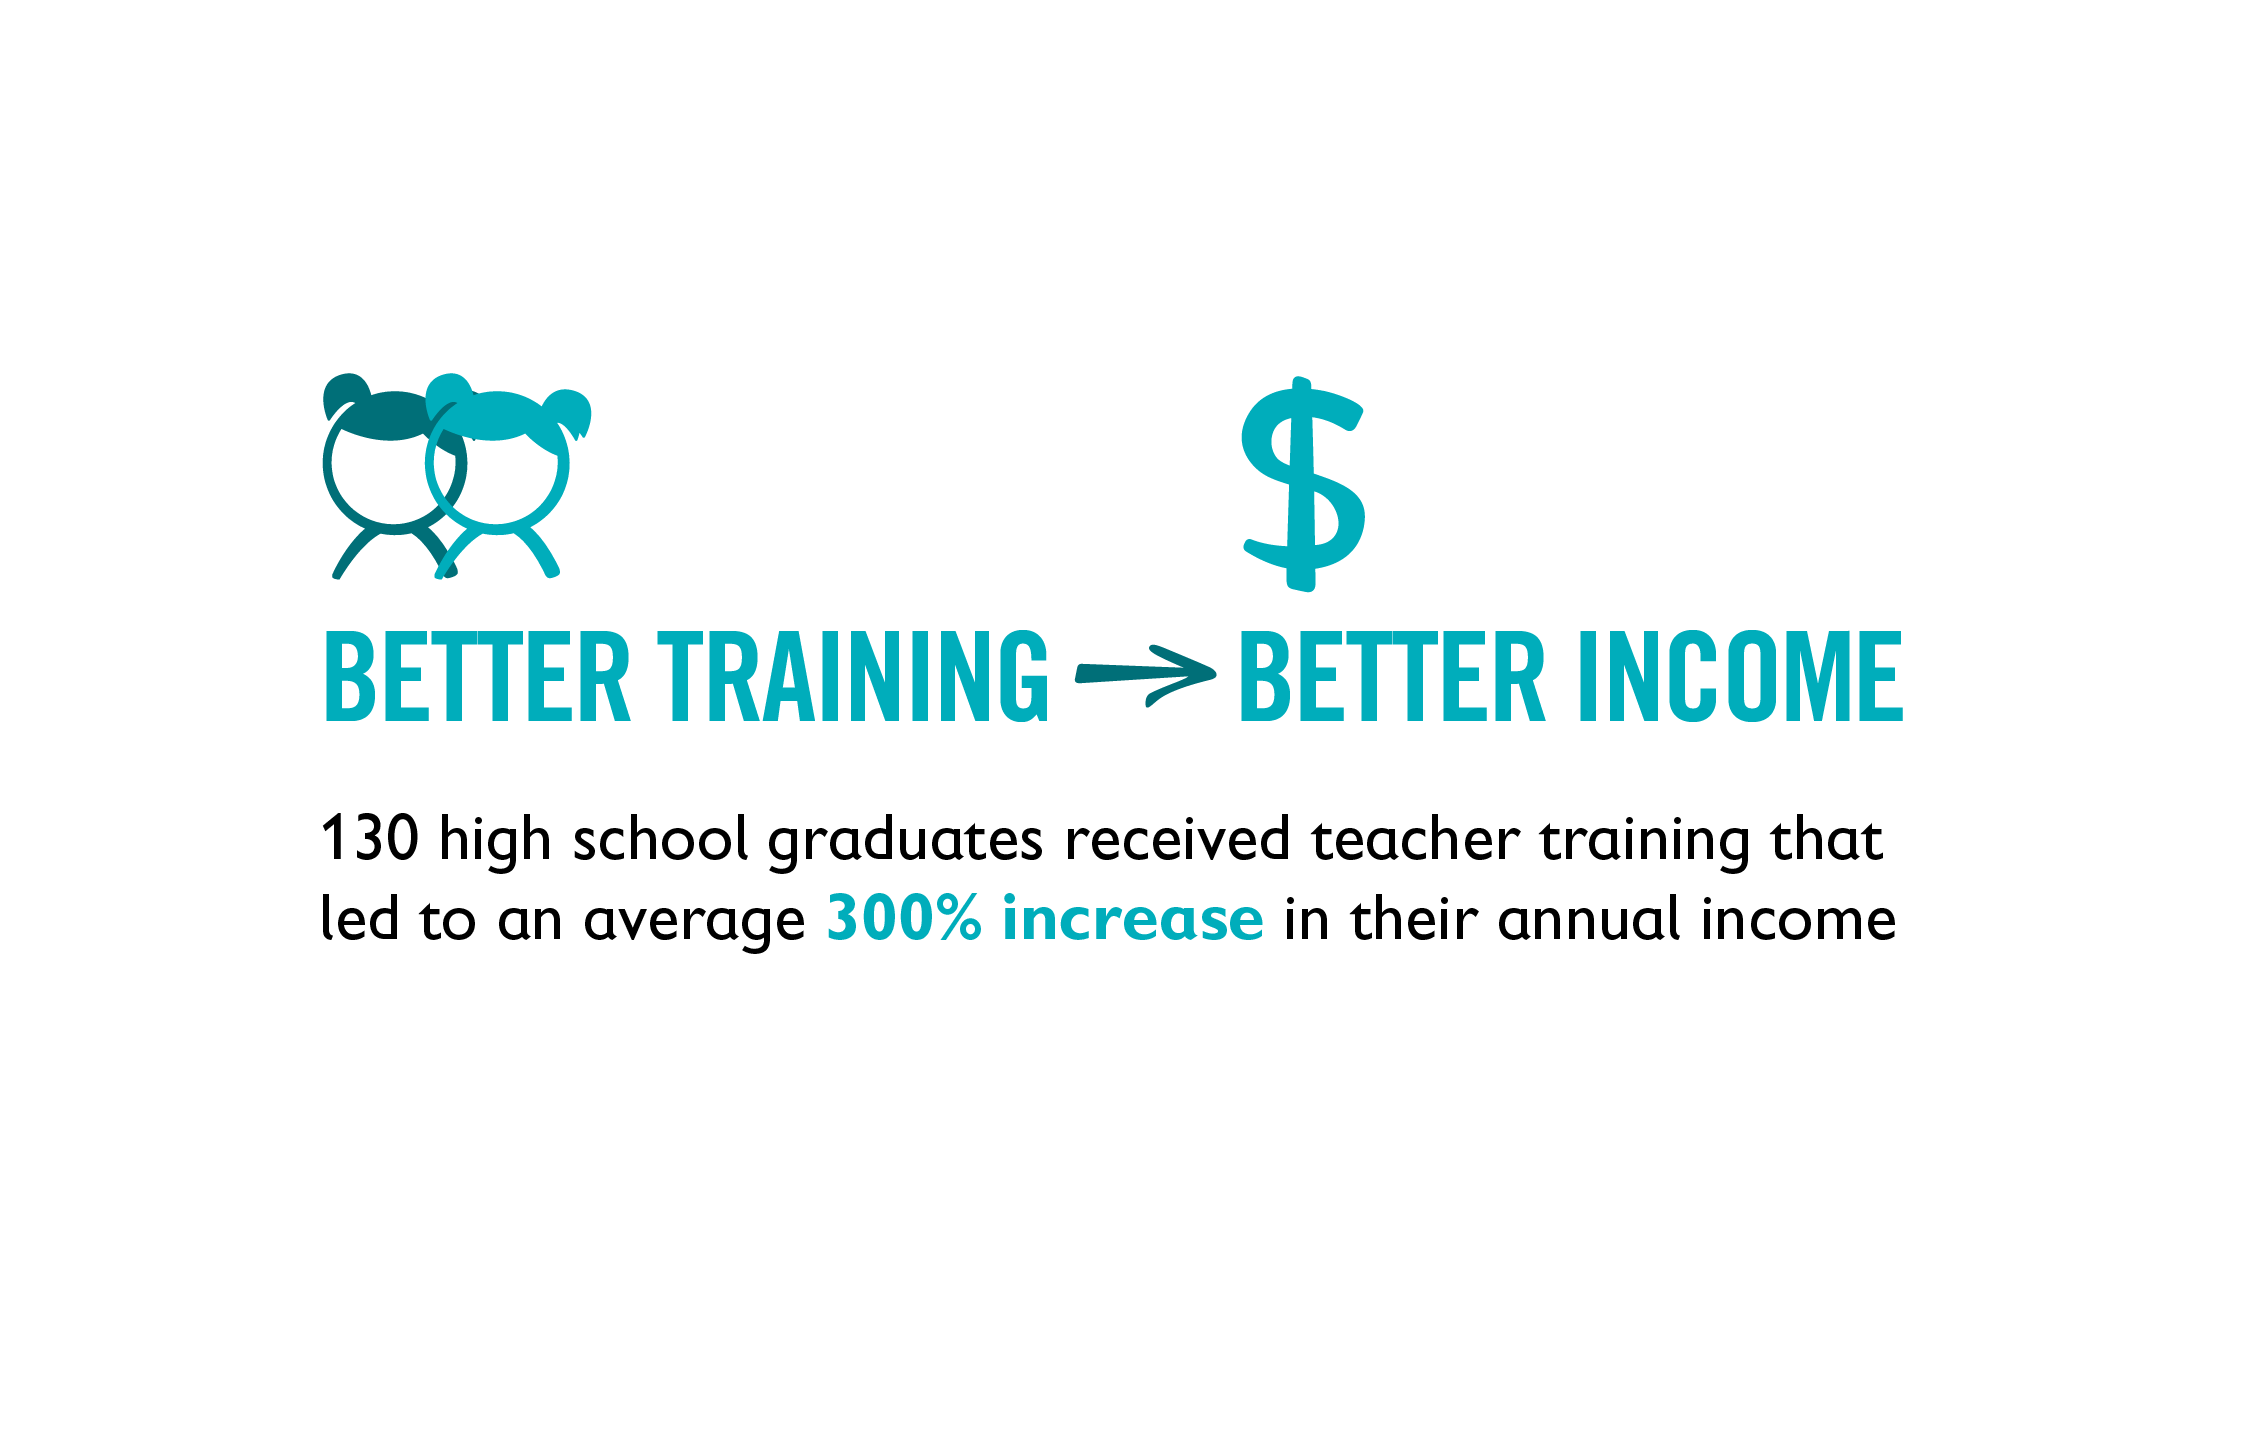 Graphic, "Better Training, Better Income"